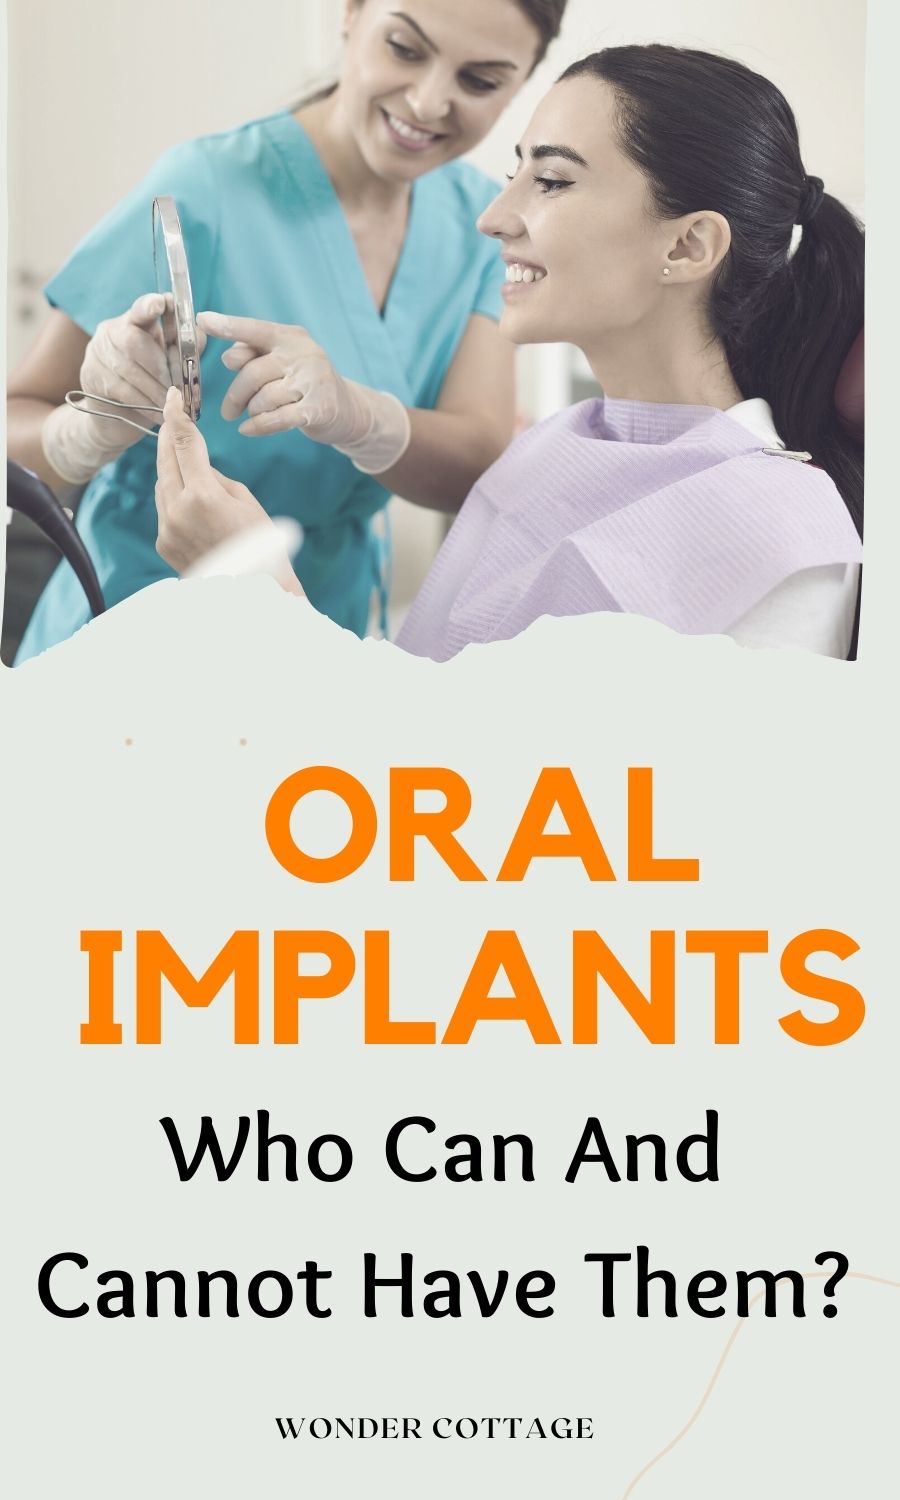 Oral Implants: Who Can And Cannot Have Them?